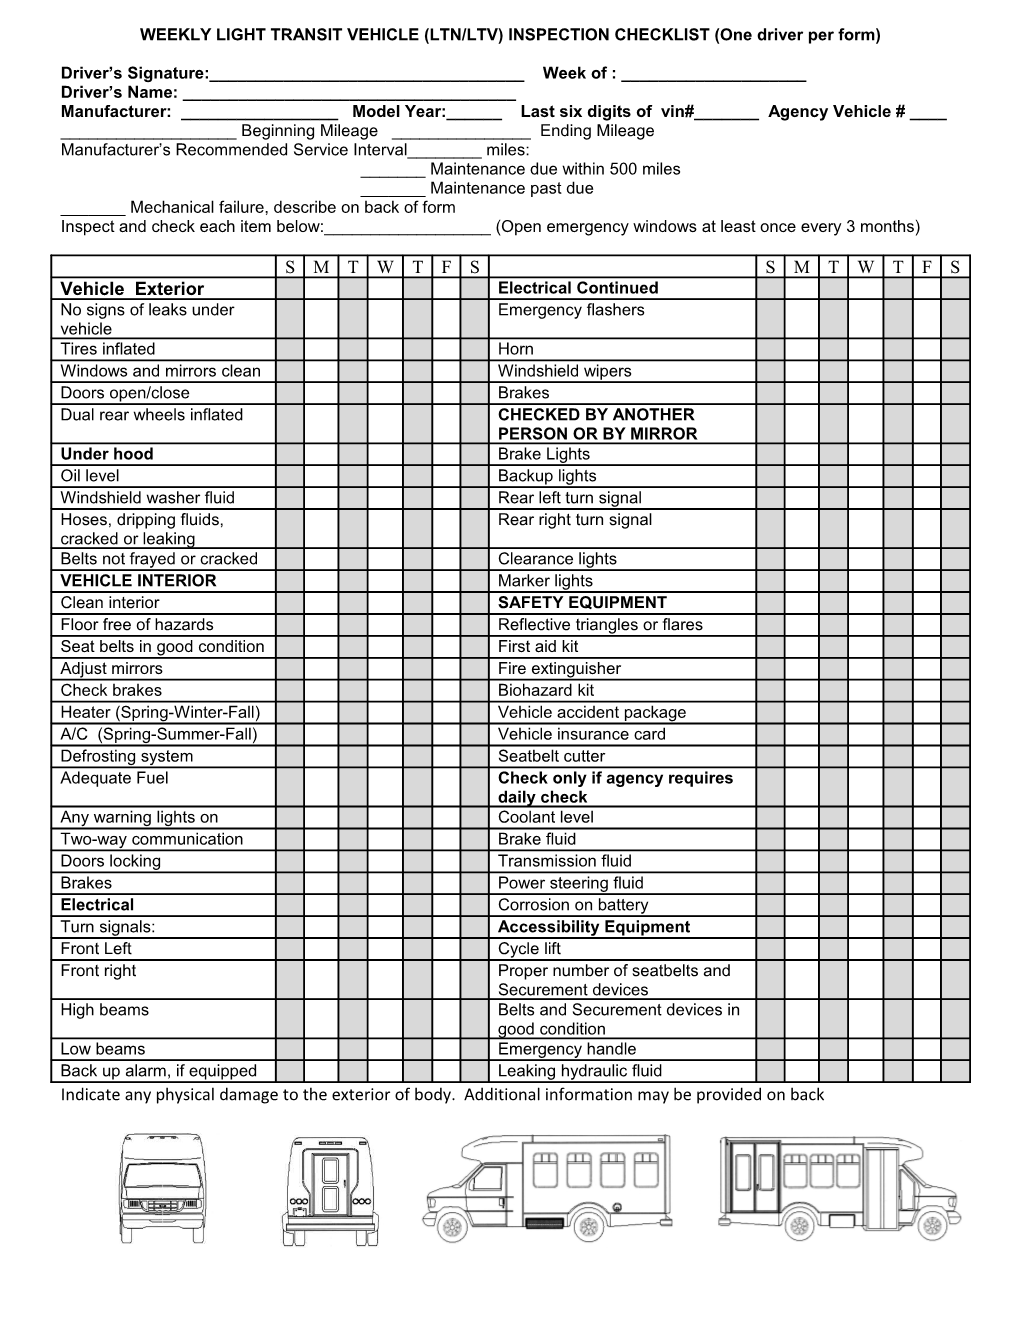 WEEKLY LIGHT TRANSIT VEHICLE (LTN/LTV) INSPECTION CHECKLIST (One Driver Per Form)